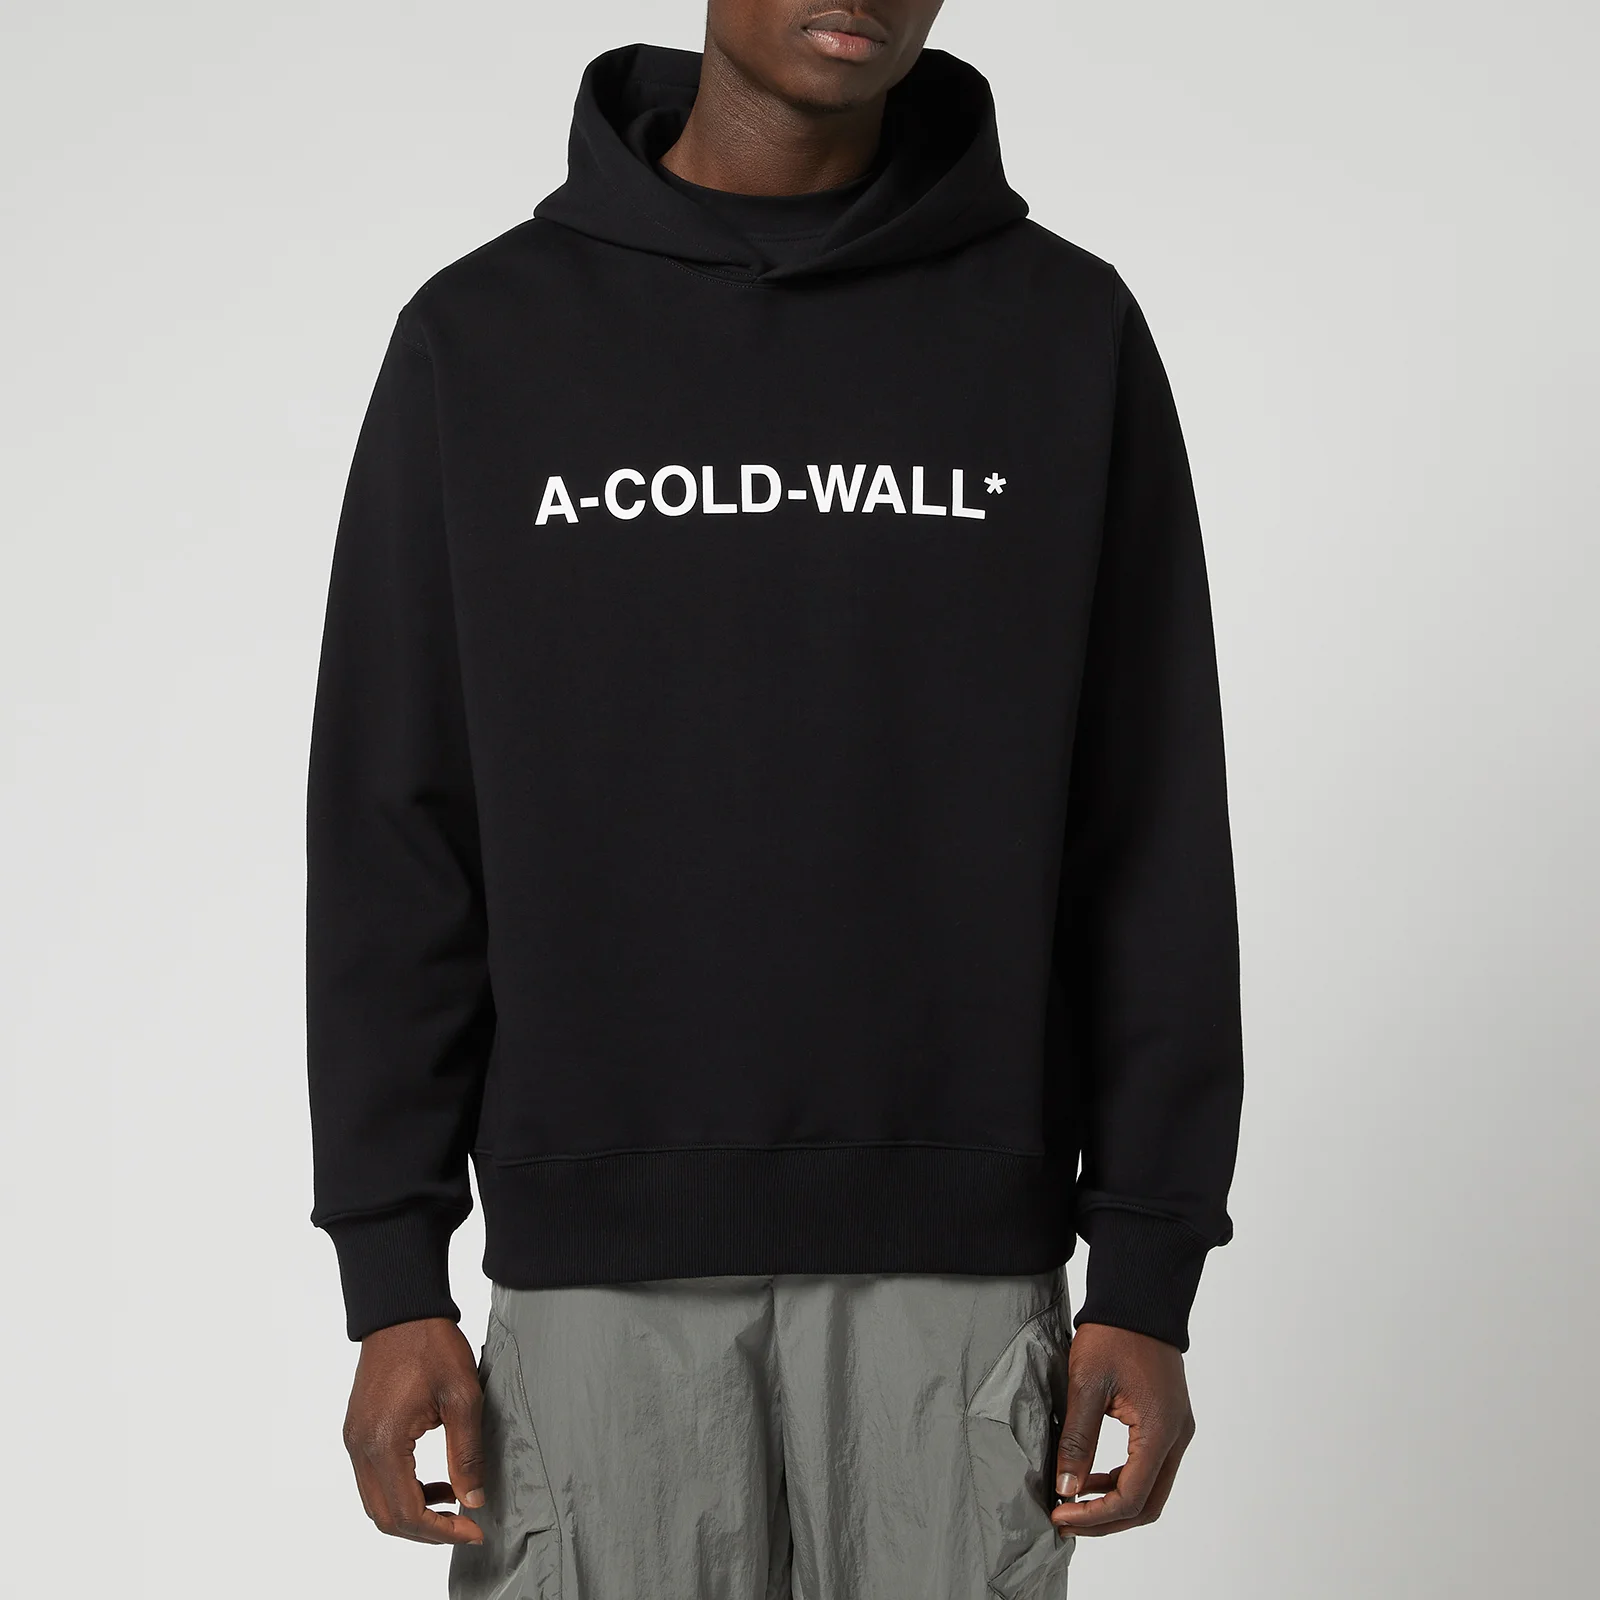 A-COLD-WALL* Men's Essential Logo Hoodie - Black Image 1